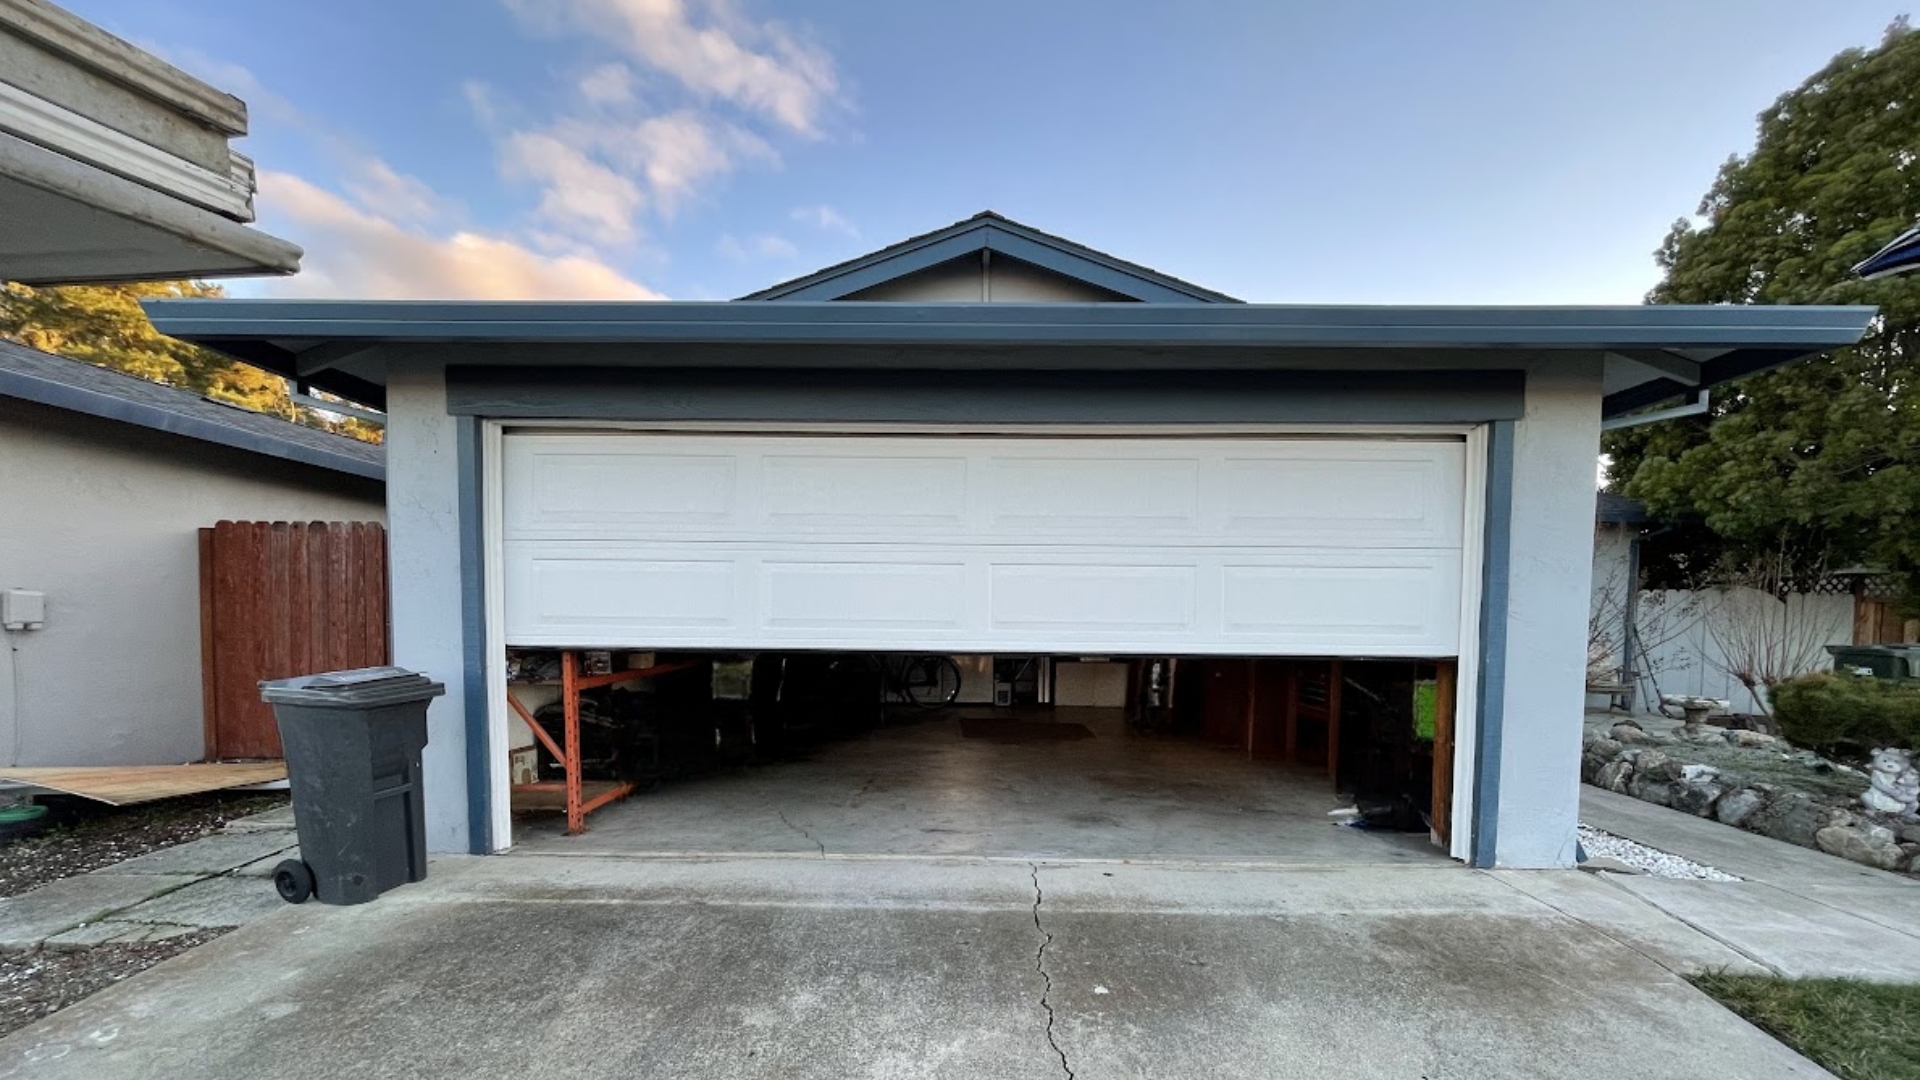 A garage door with adjusted travel limits